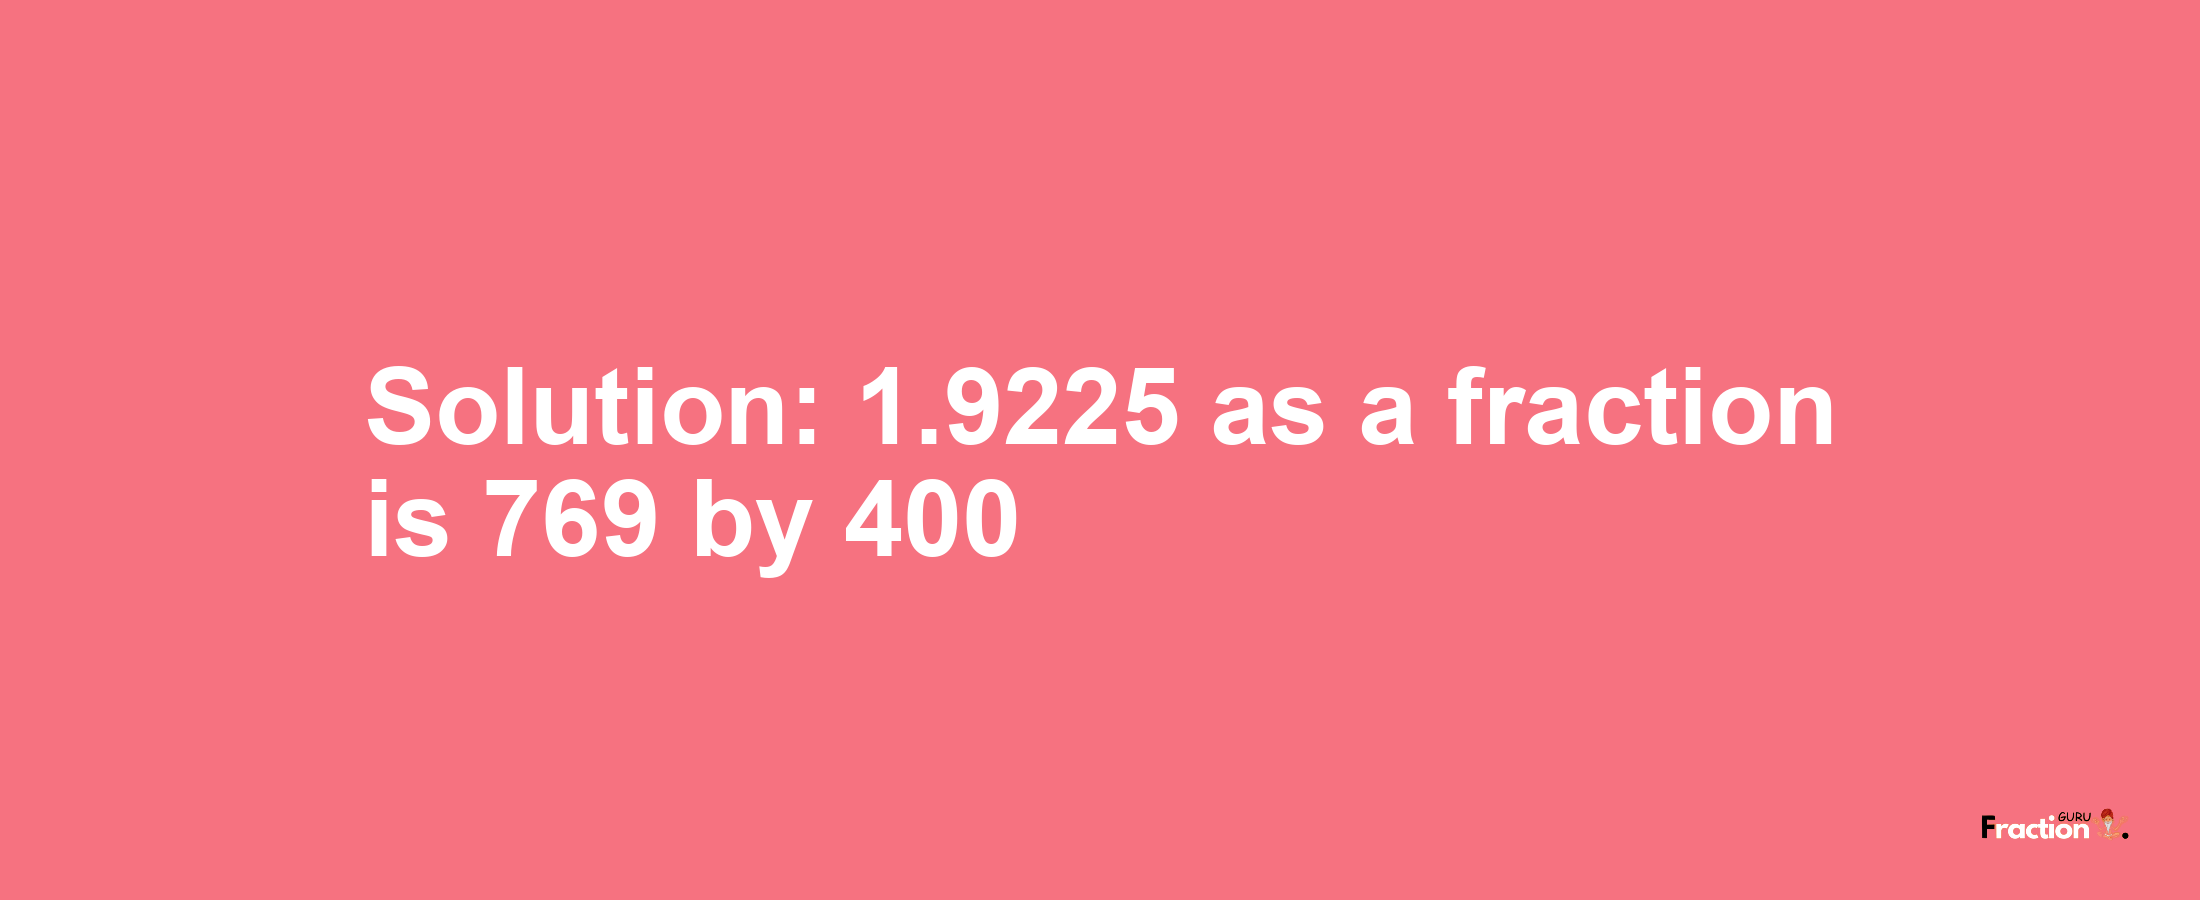 Solution:1.9225 as a fraction is 769/400